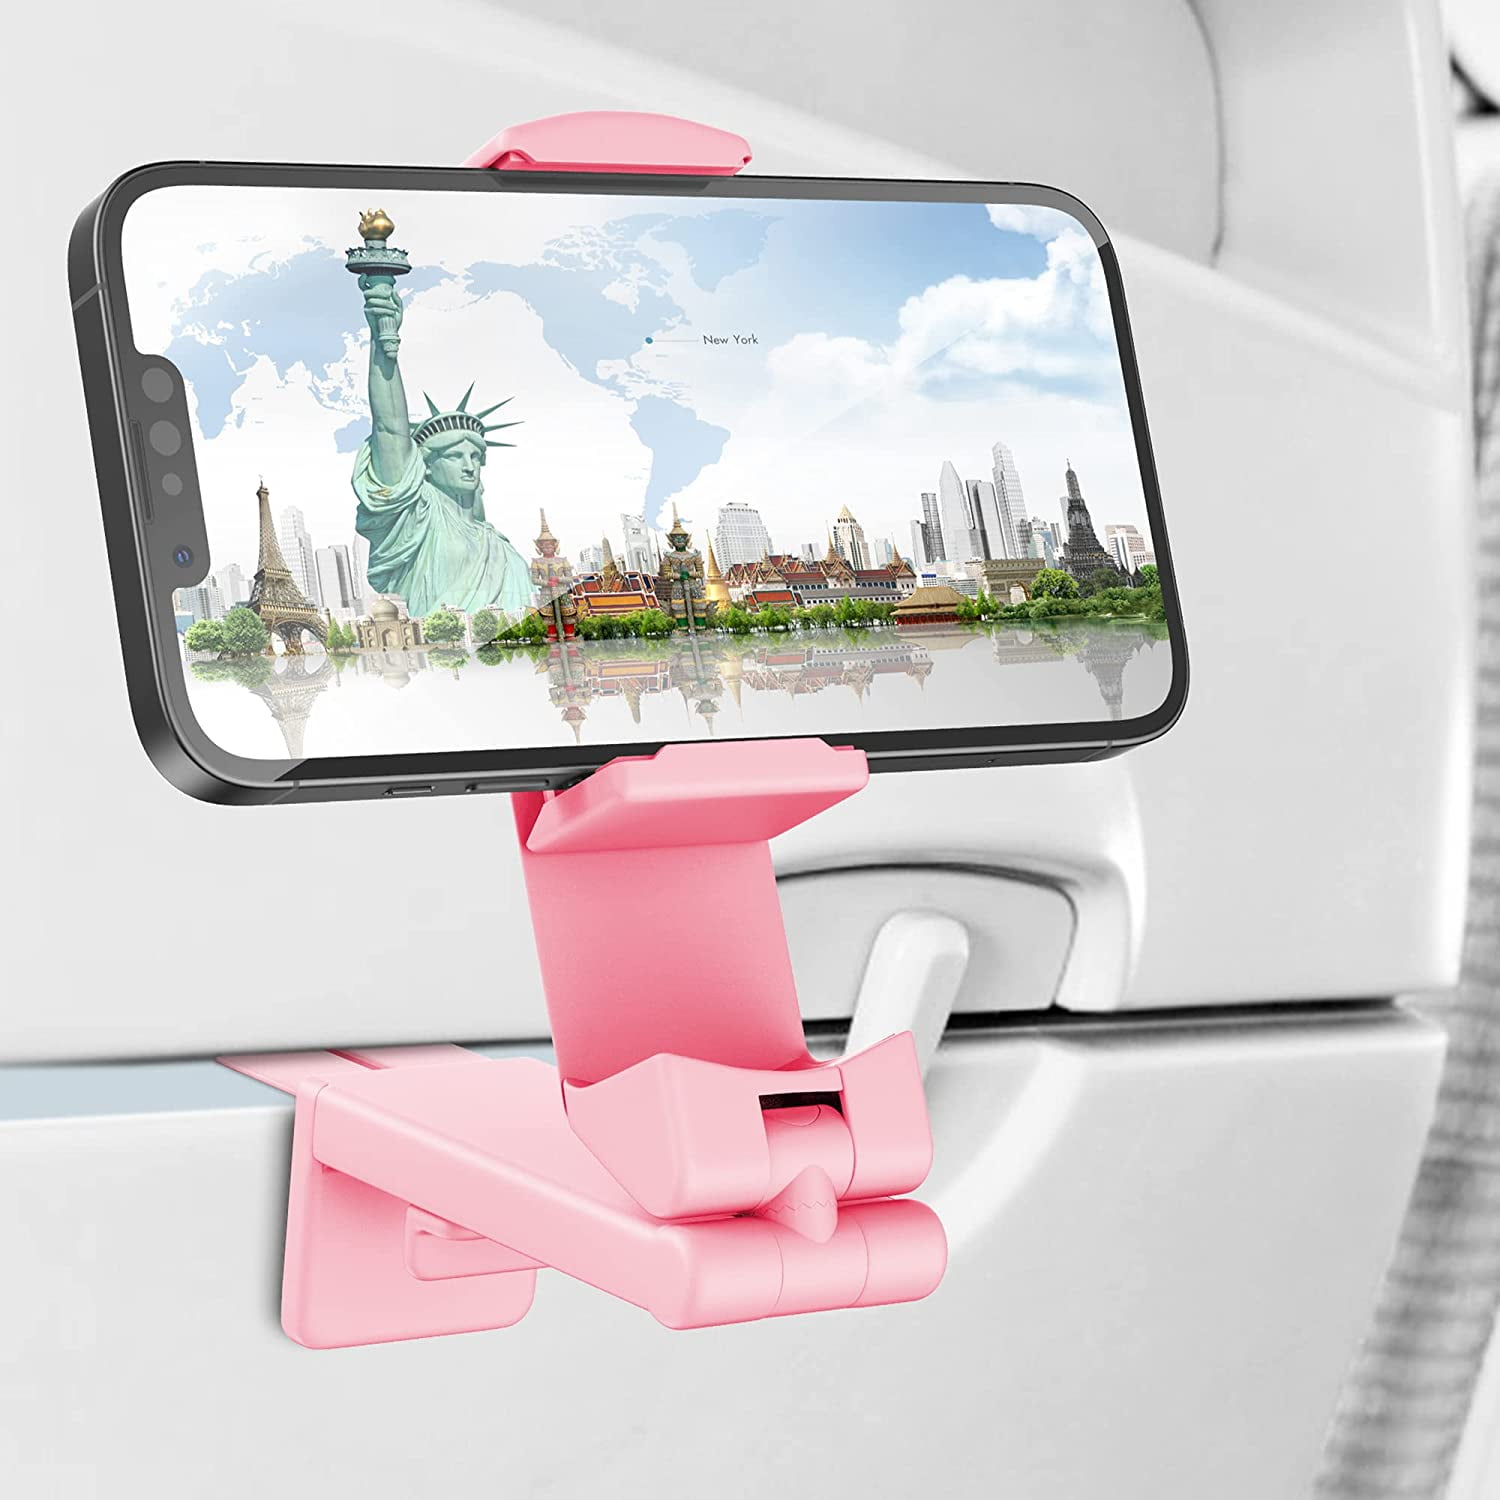  Airplane Travel Essentials Phone Holder, Klearlook Universal  Flight Essentials Phone Mount with Multi-Directional 360° Rotation, Travel  Must Haves Handsfree Gadgets for Flying, Table or Outdoor-Pink : Cell  Phones & Accessories